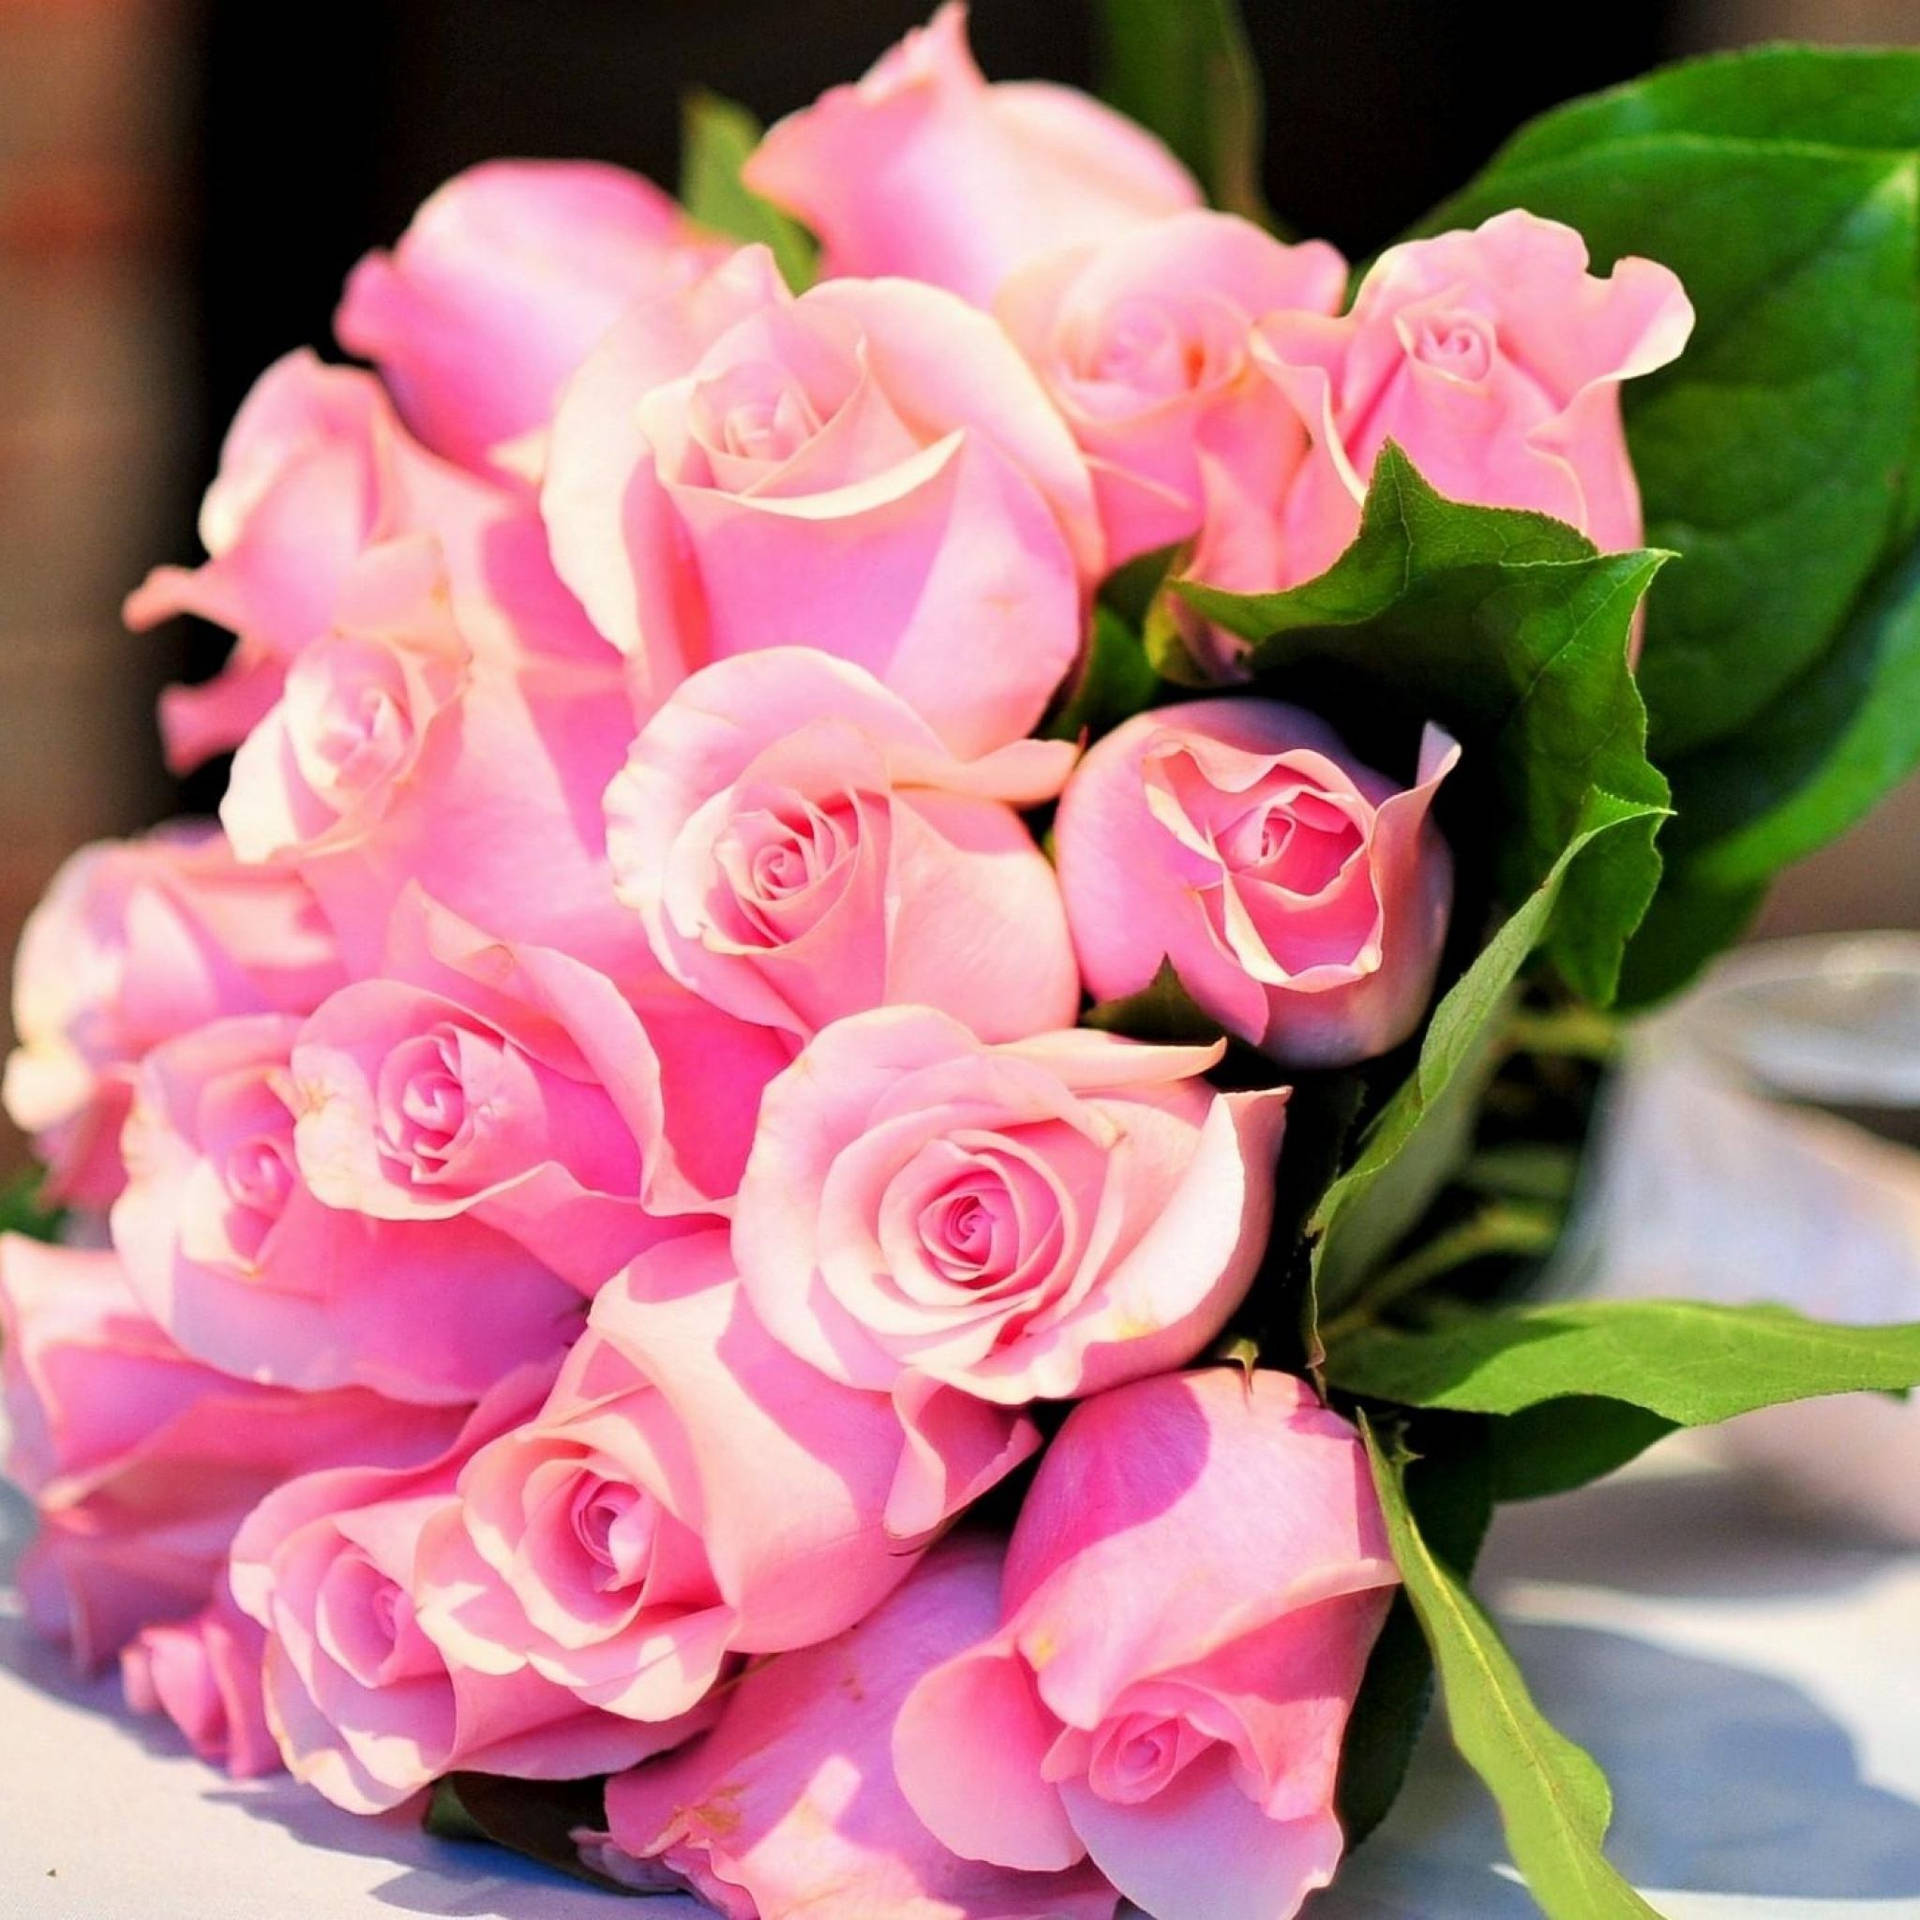 Cute Pink Flower Bouquet Of Roses